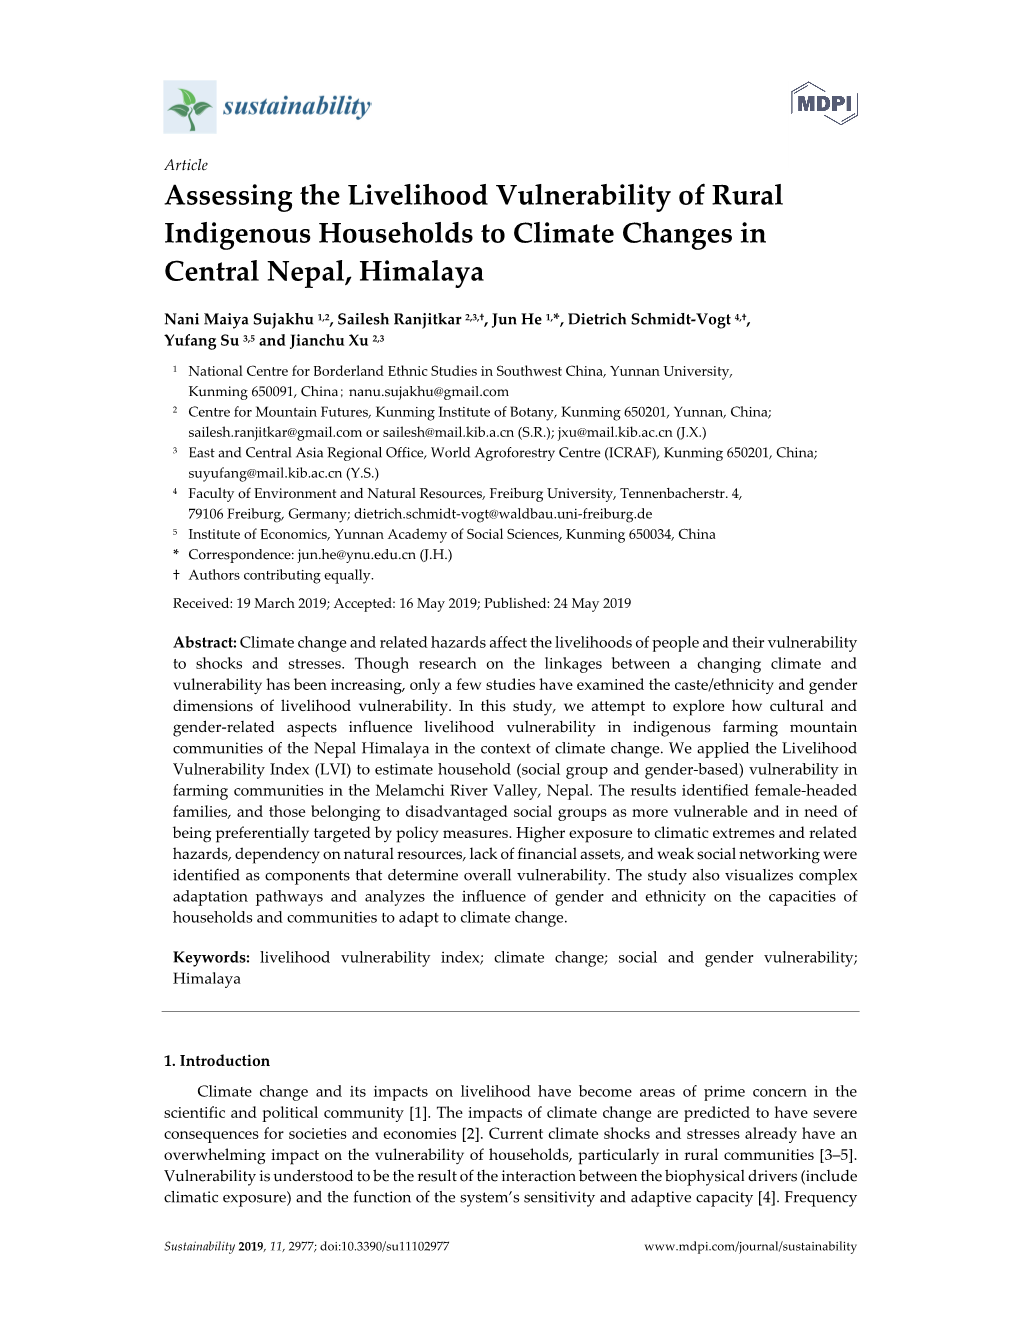 Assessing the Livelihood Vulnerability of Rural Indigenous Households to Climate Changes in Central Nepal, Himalaya